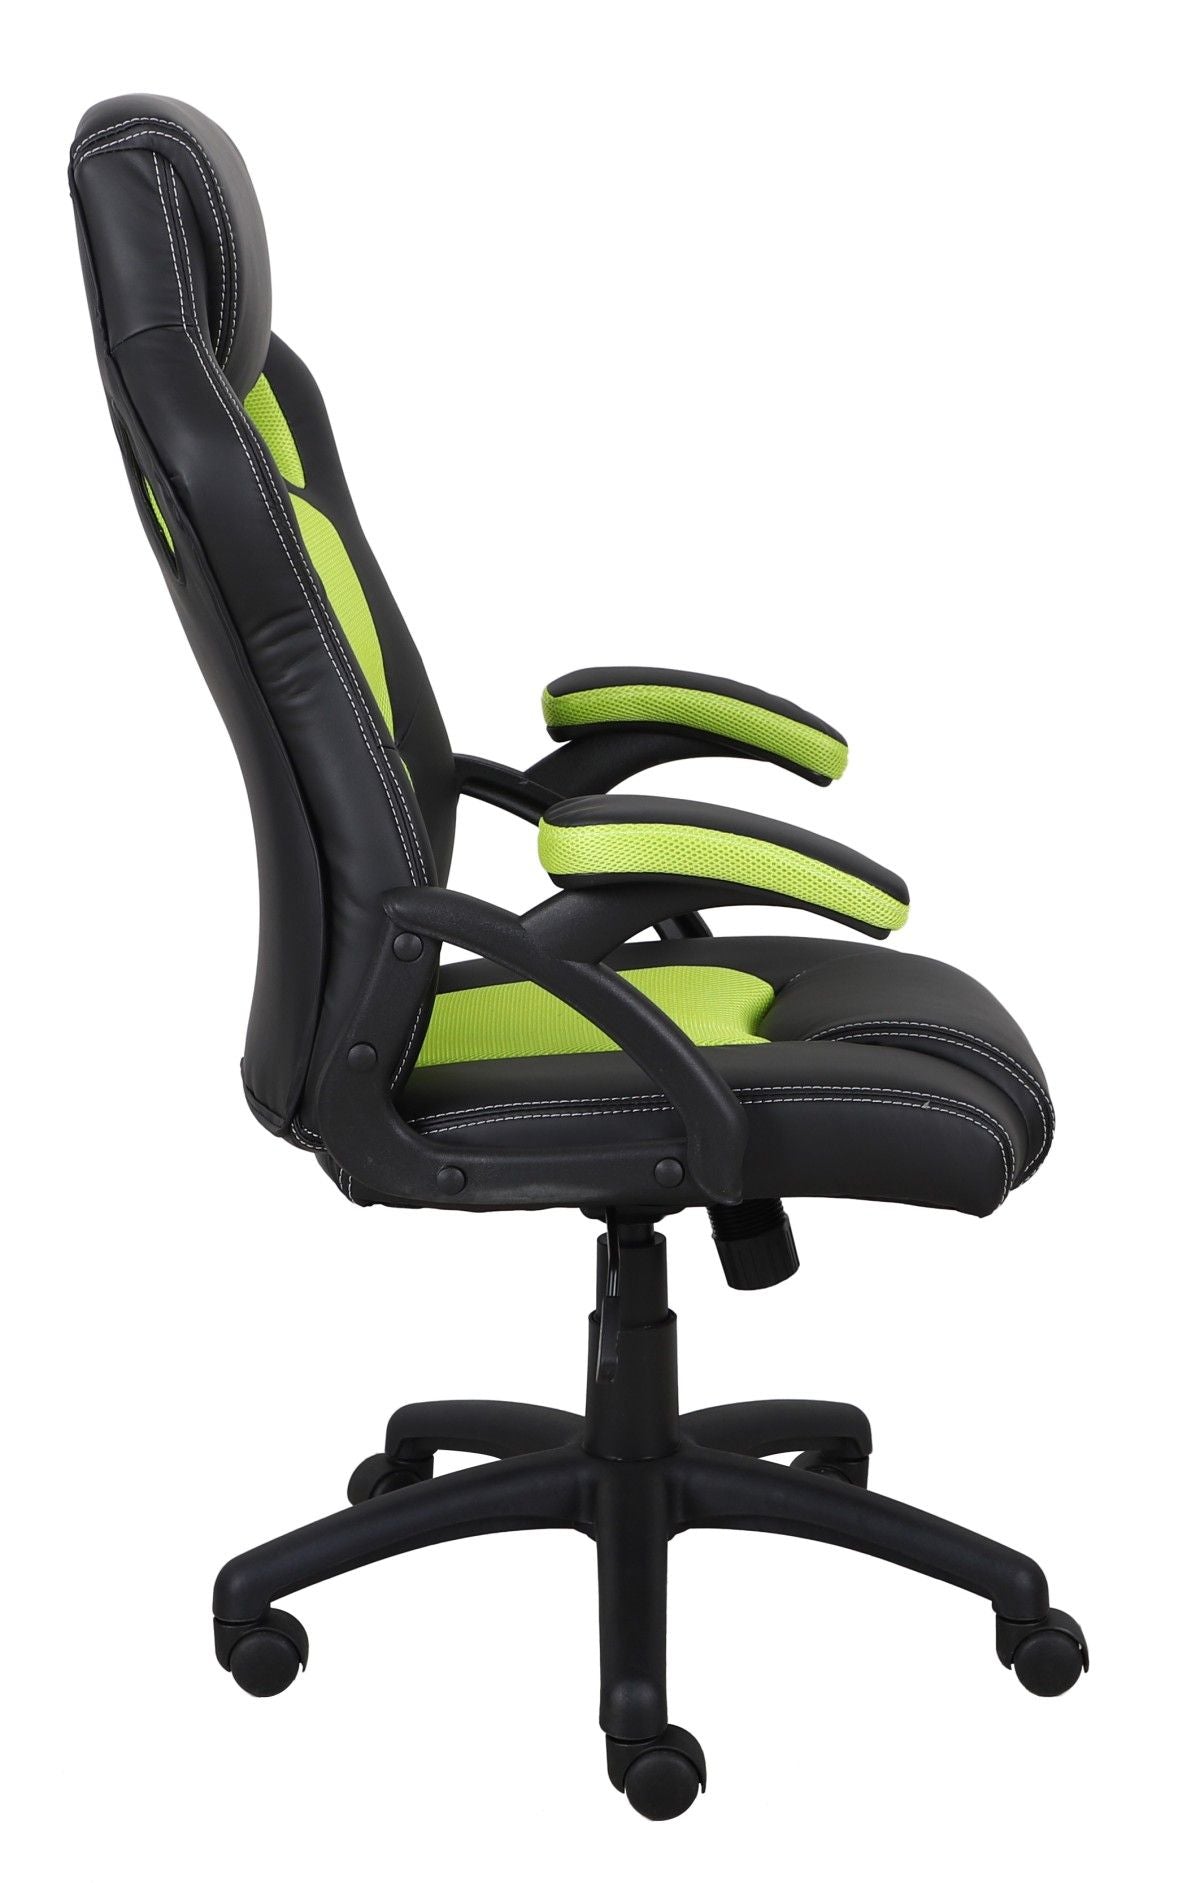 Miles Gaming Chair - Green and Black